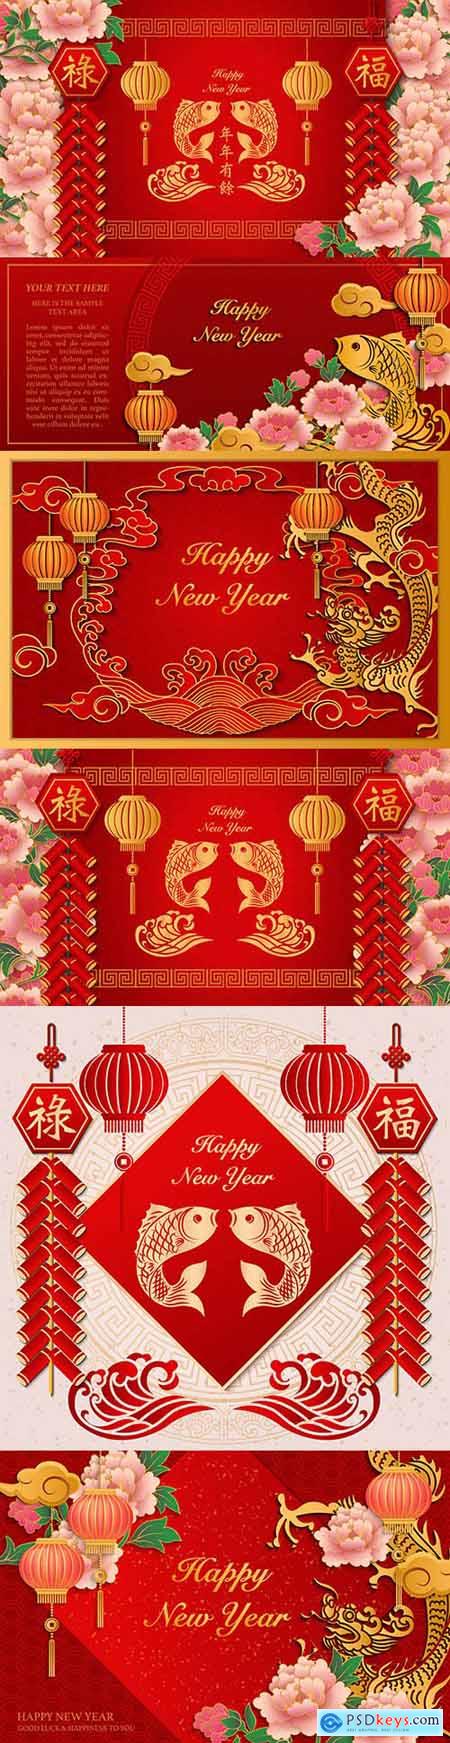 Happy Chinese New Year retro red design illustration » Free Download ...